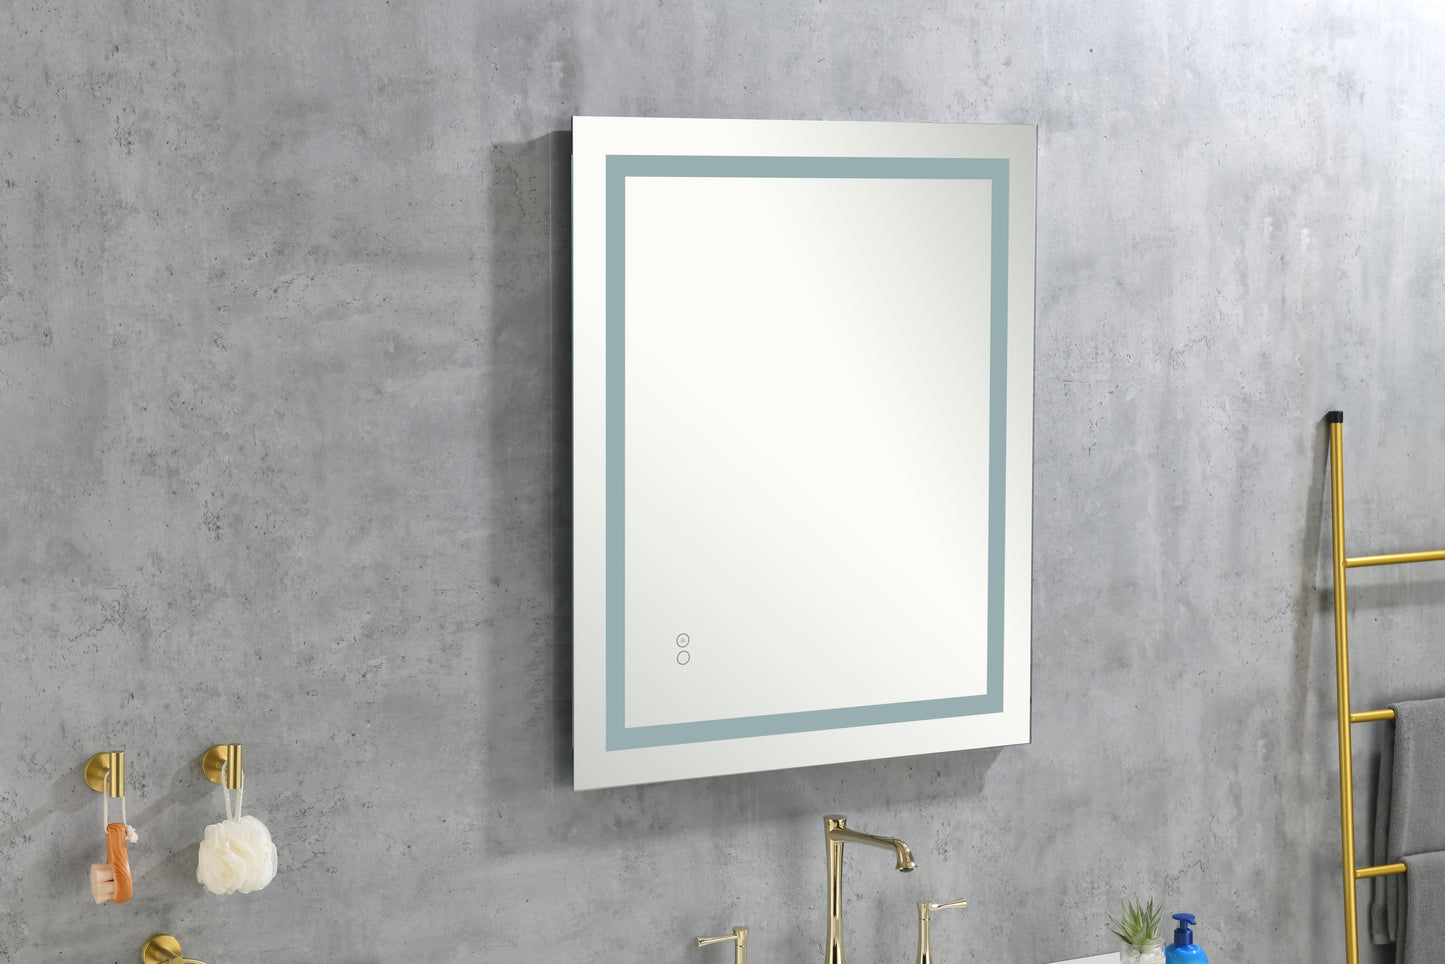 36x28 Inch LED Lighted Makeup Mirror For Bathroom Vanity With Touch Bottom For Color Temperature, Brightness&Defogger, Ultra-Thin Wall Mounted Mirror With High Lumen, Vertical/Horizontal